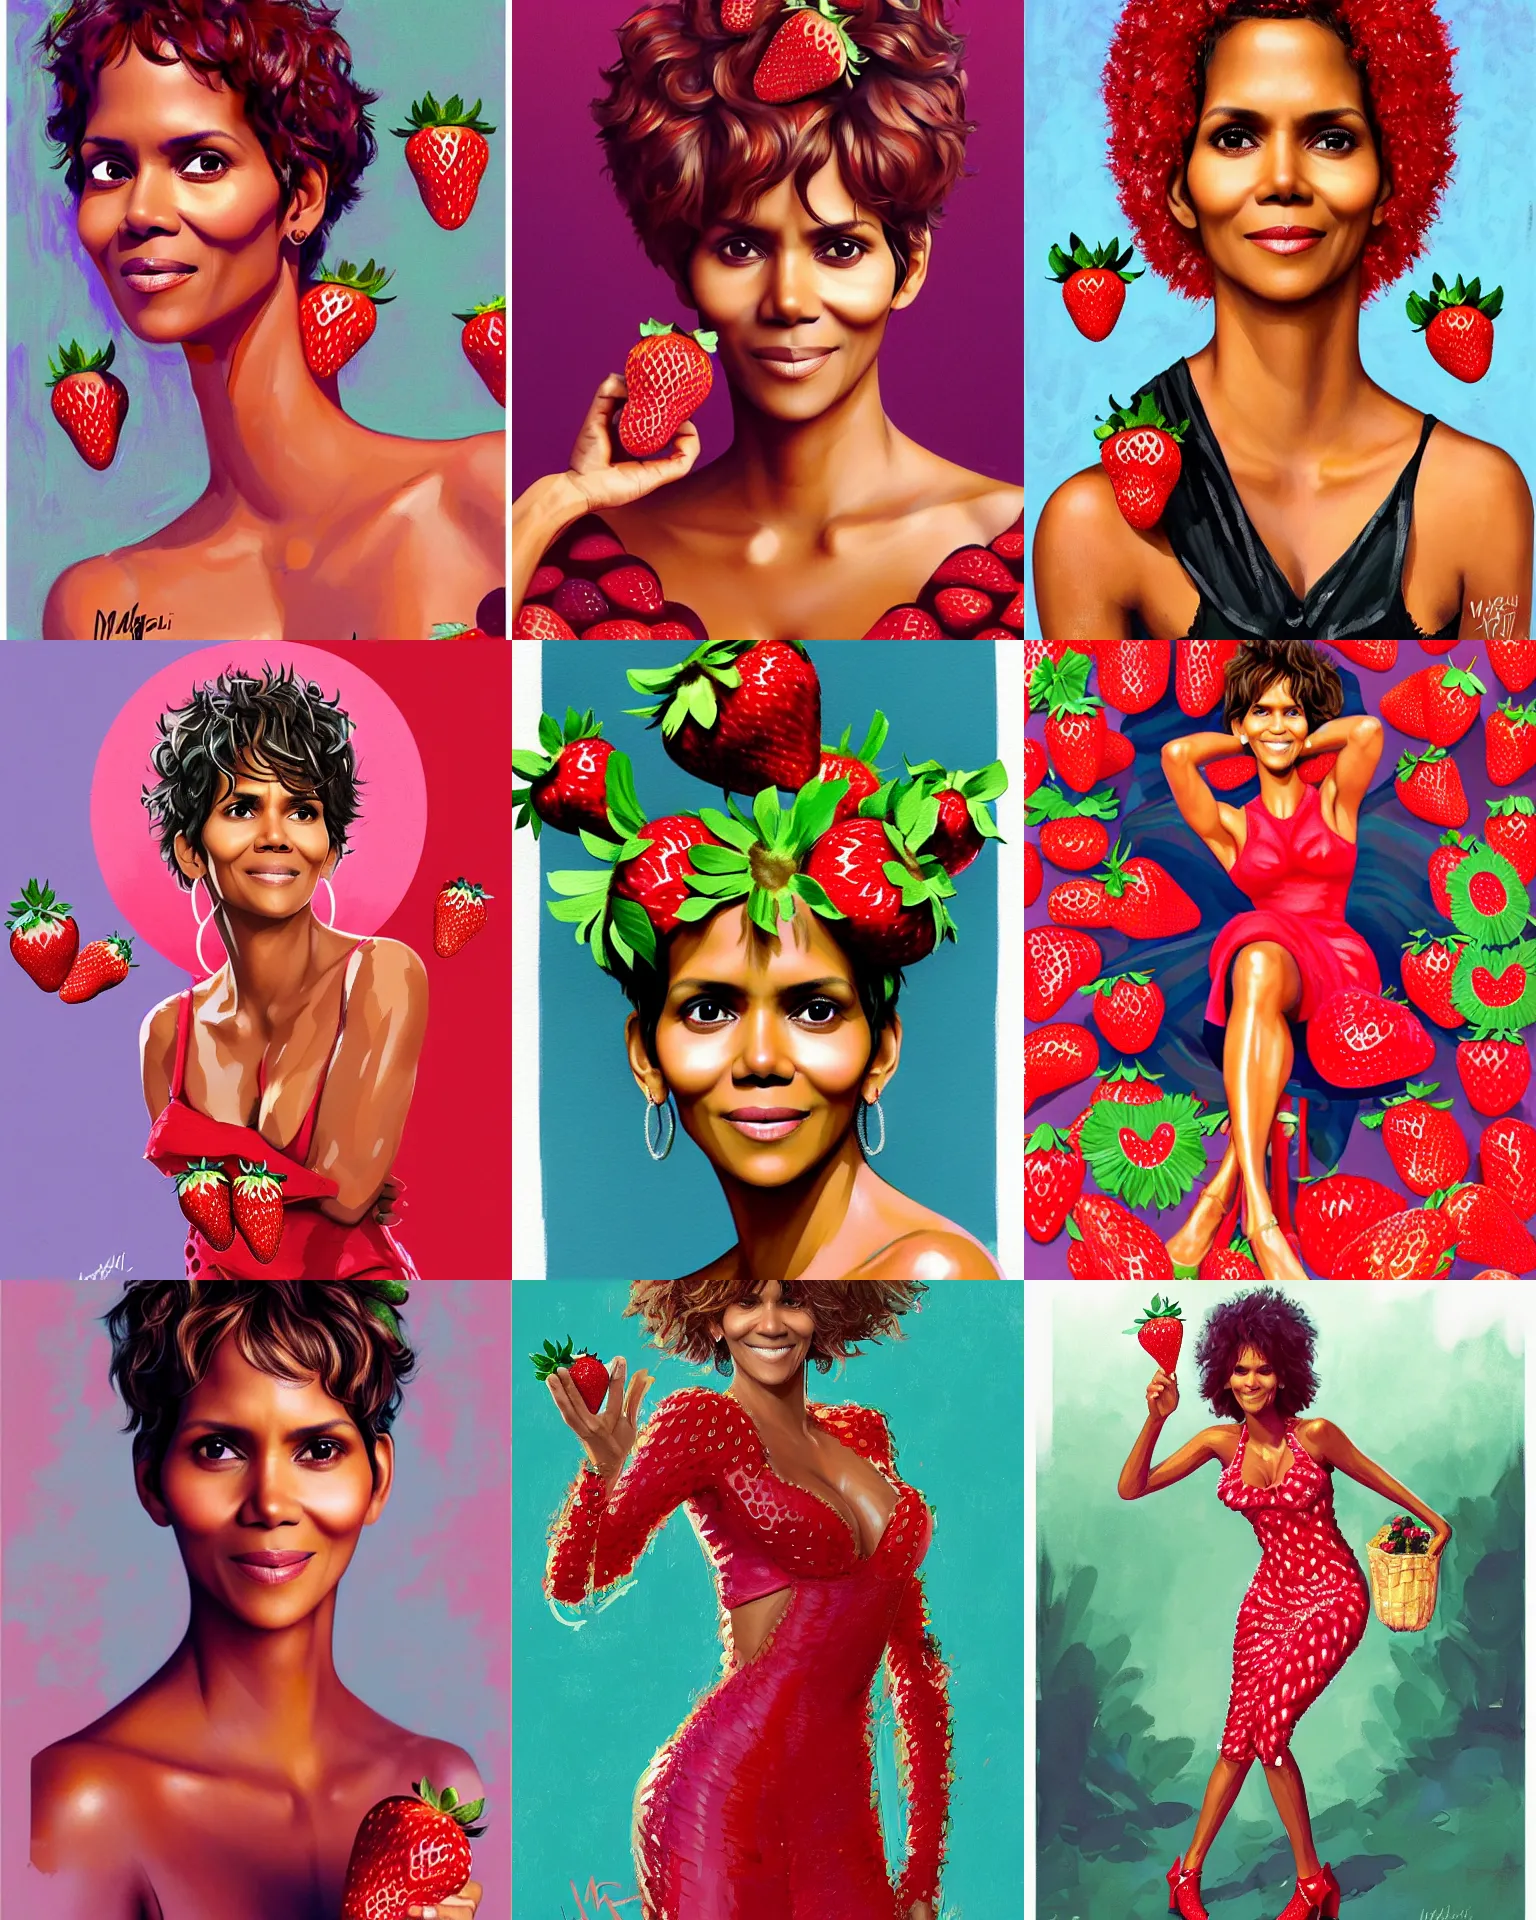 Prompt: halle berry as the strawberry mascot, red carpet, strawberry festival, charlotte olympia, dramatic lighting, london fashion week, friends of fruits, bedazzled fruit costumes, shaded lighting poster by magali villeneuve, artgerm, jeremy lipkin and michael garmash, rob rey and kentaro miura style, trending on art station